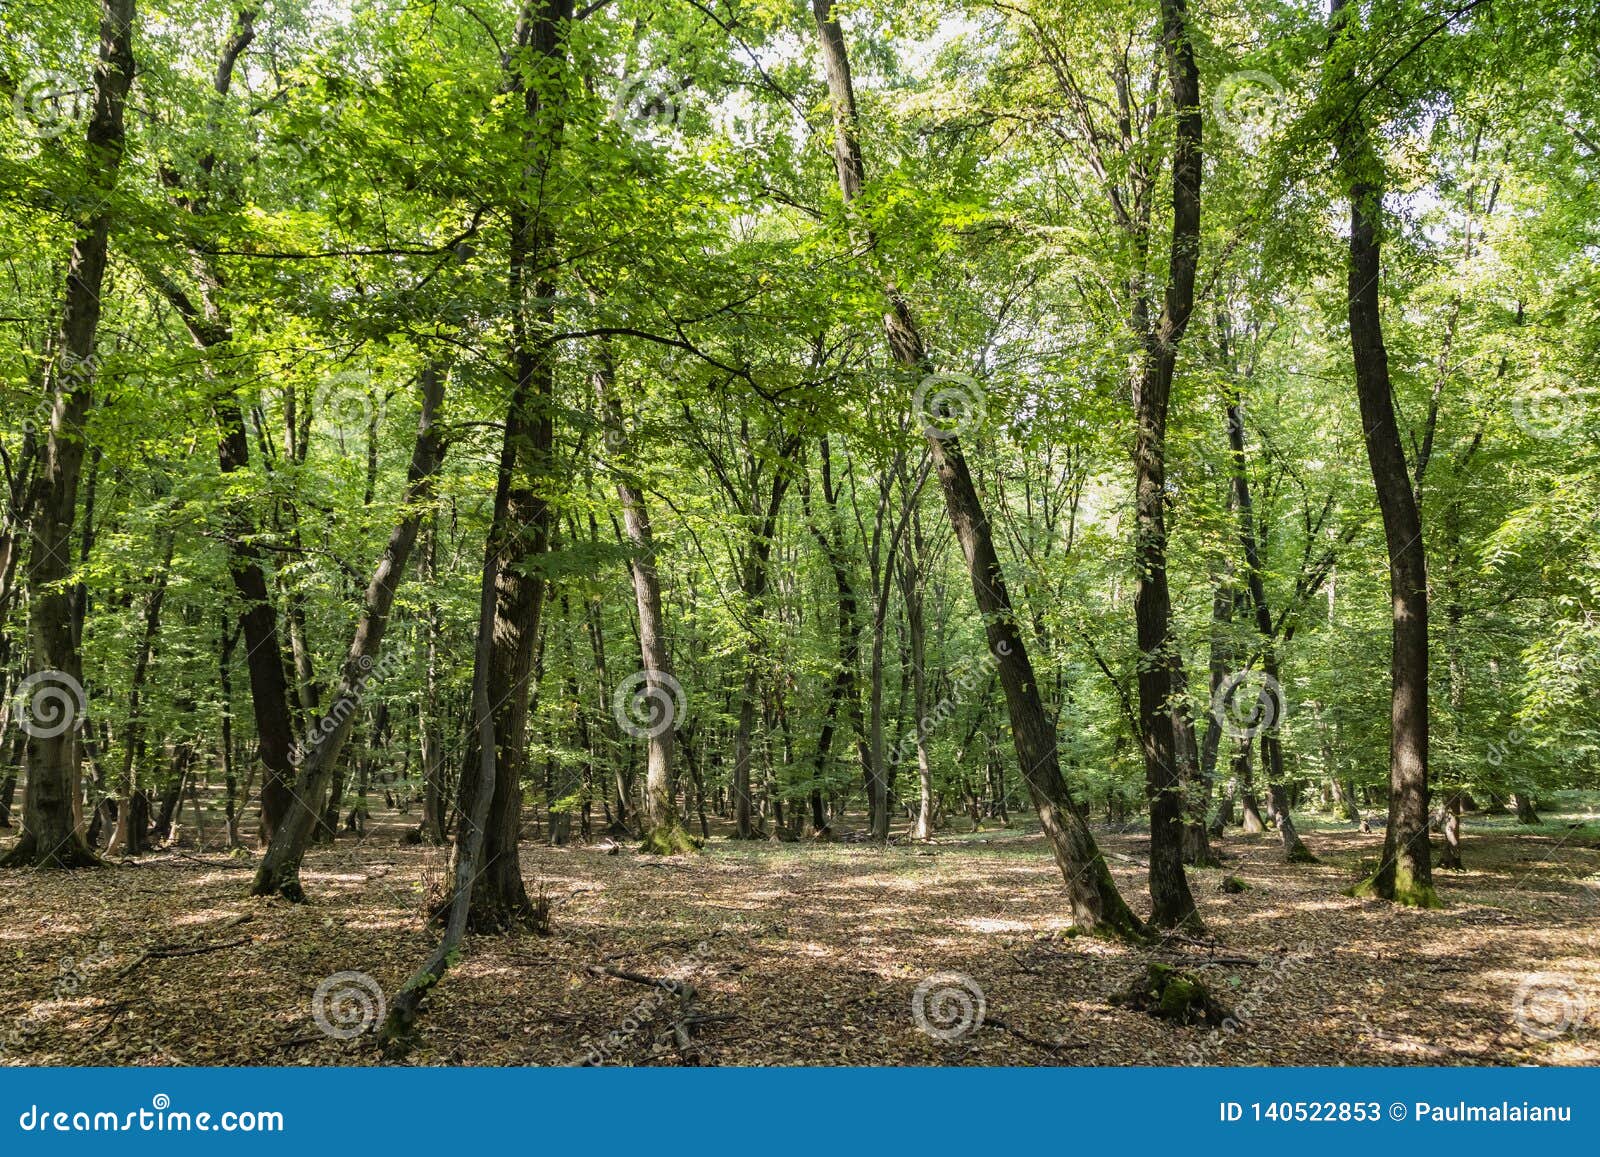 Image of the Hoia Baciu Forest, One of the Most Haunted Forest in the ...